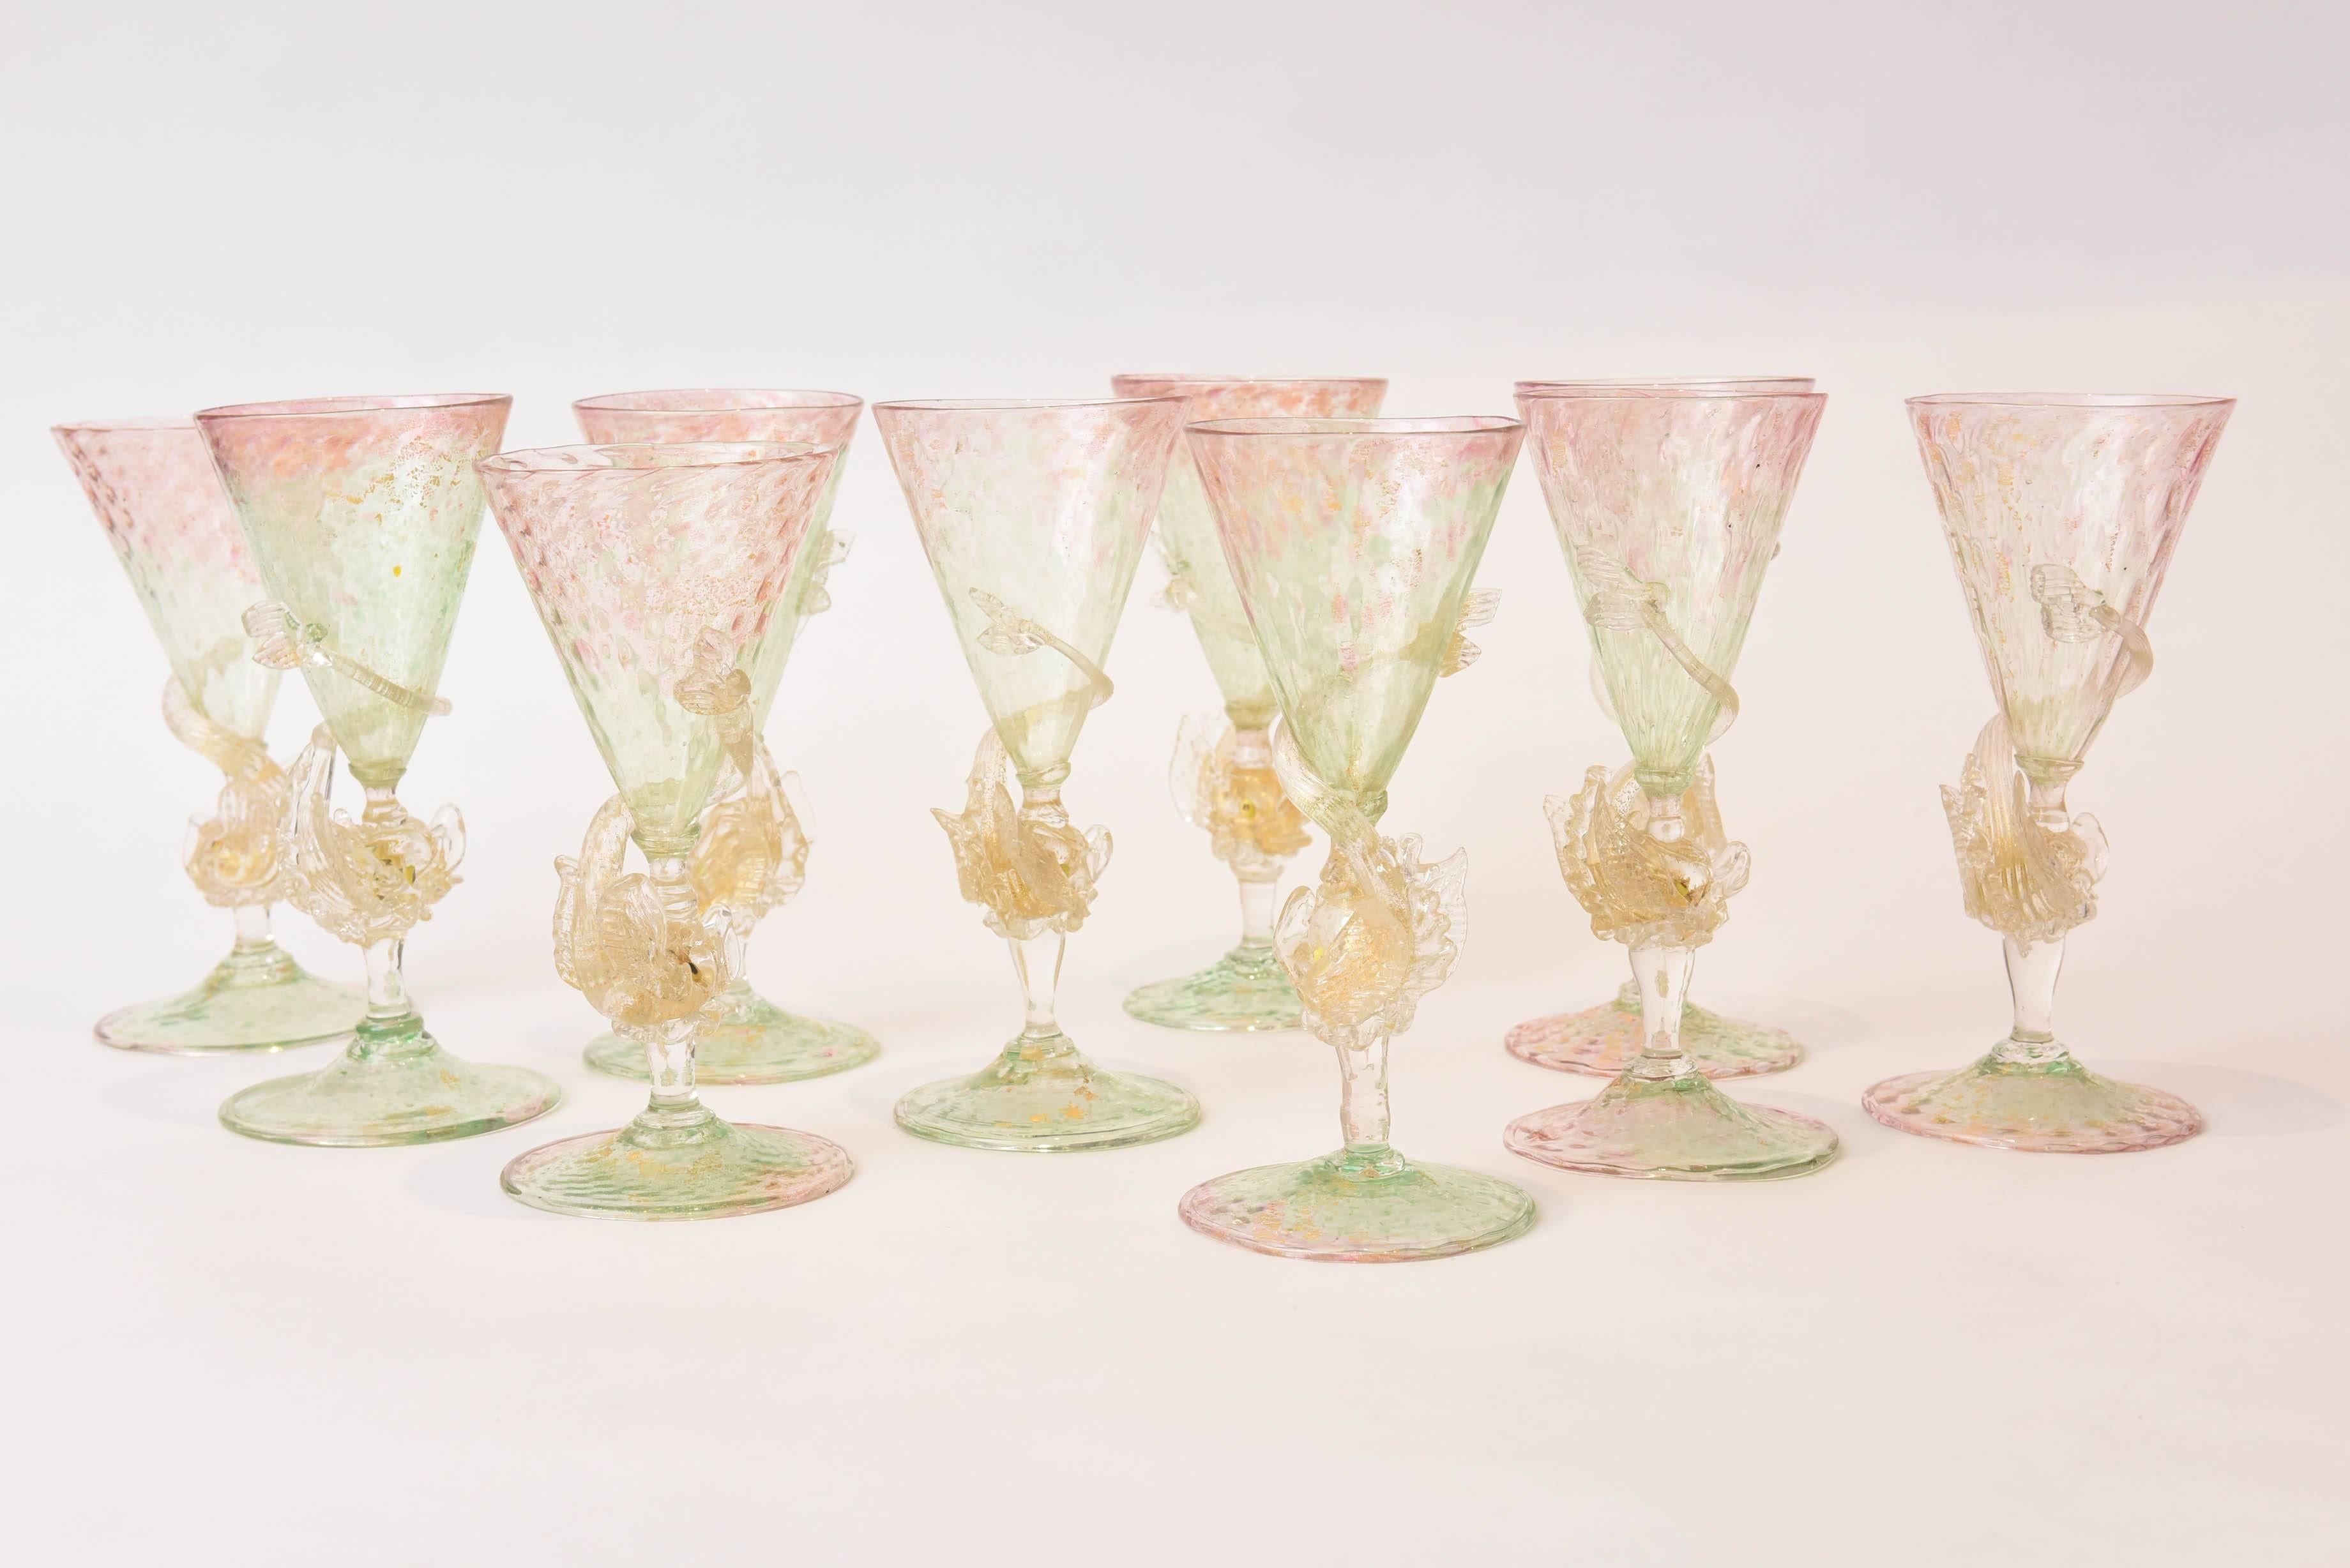 Art Glass Antique Venetian Goblets, Pink-Green with Dolphin Figural Stems. Sold Individual